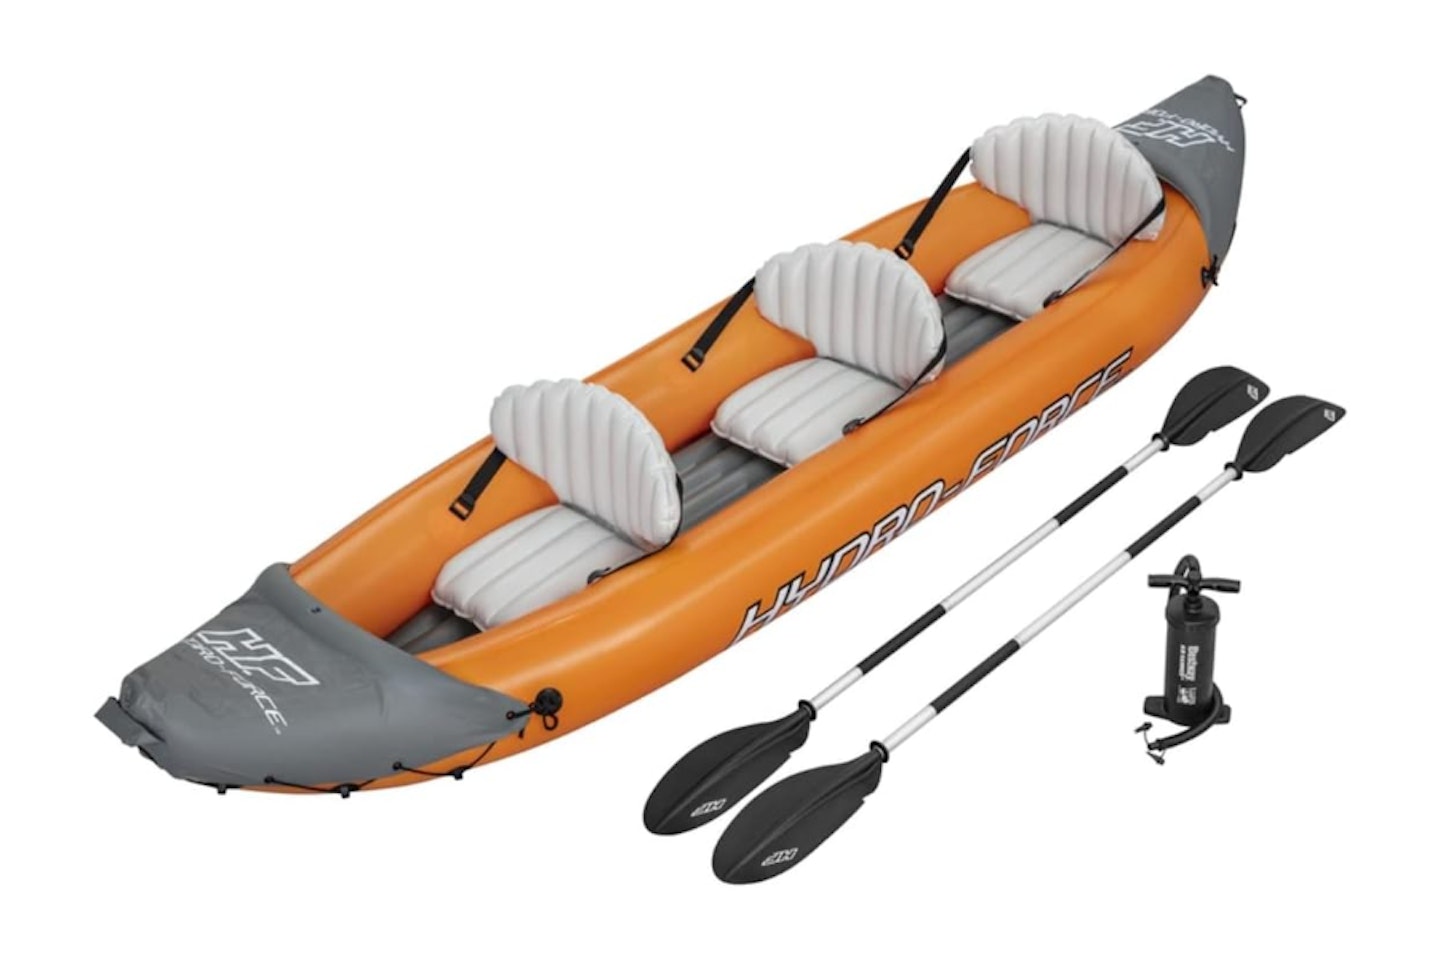 Hydroforce Lite Rapid Kayak - one of the best three-person inflatable kayaks